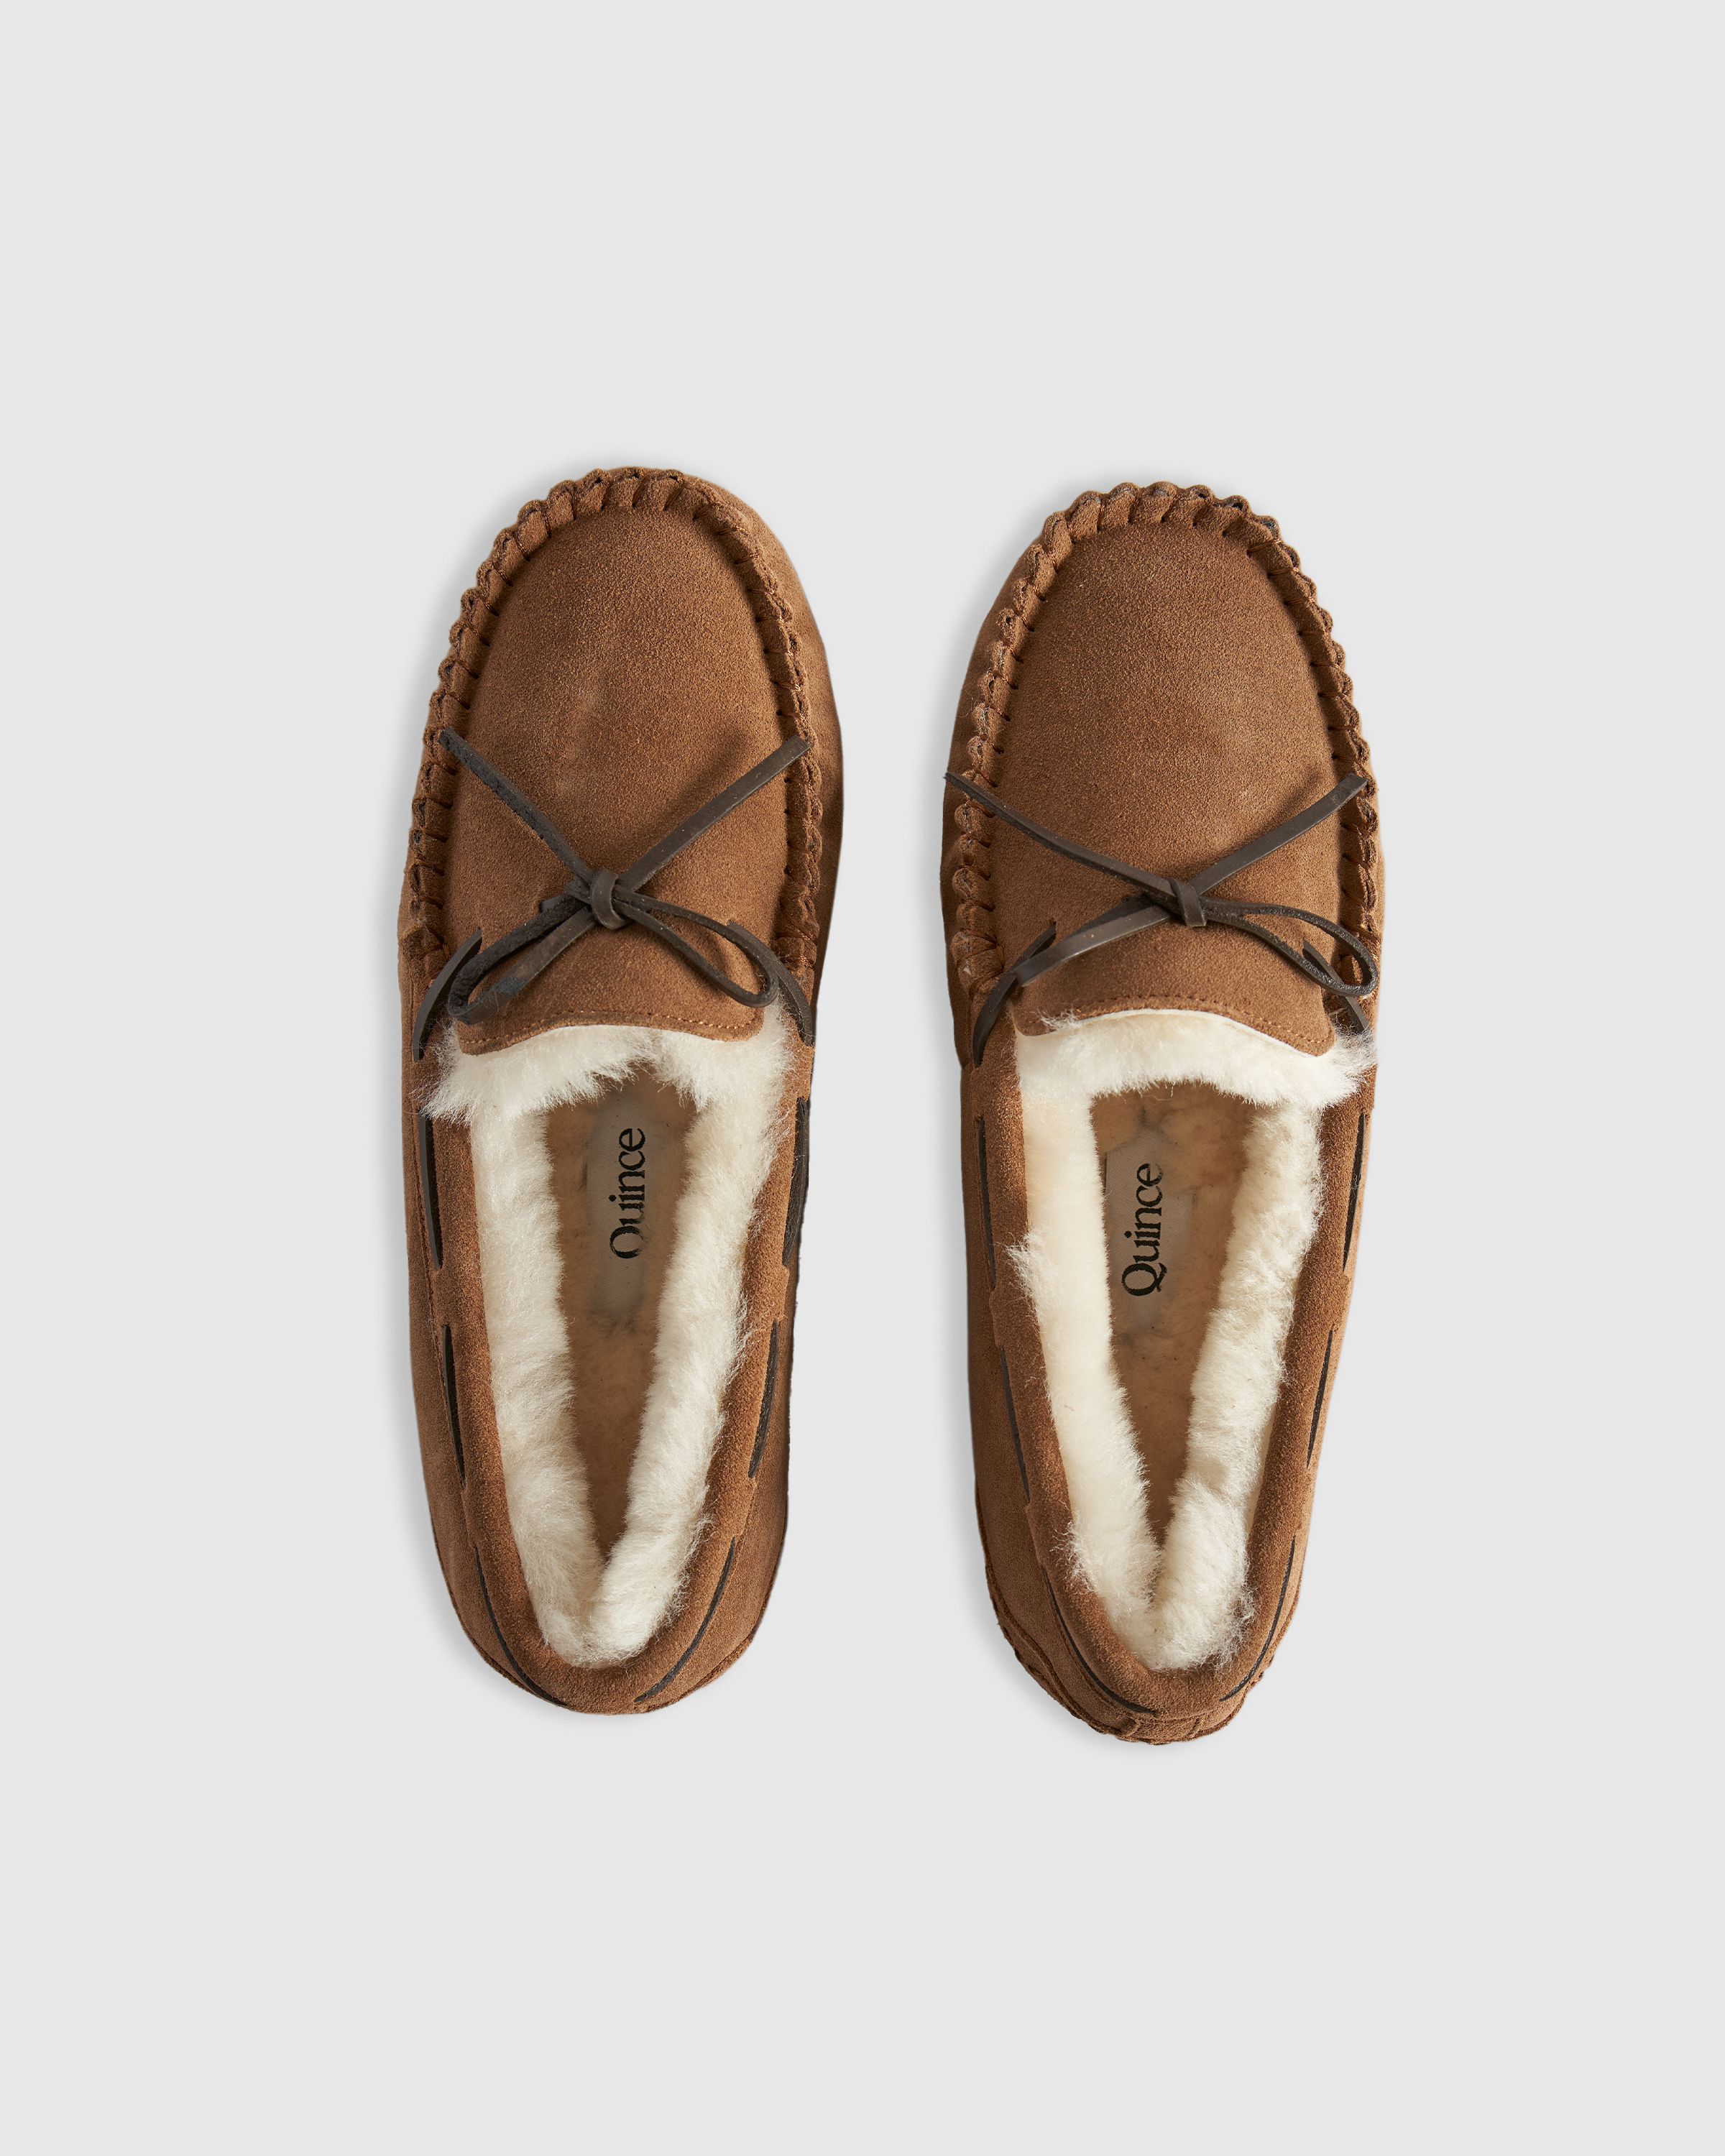 Australian Shearling Moccasin Slippers | Quince